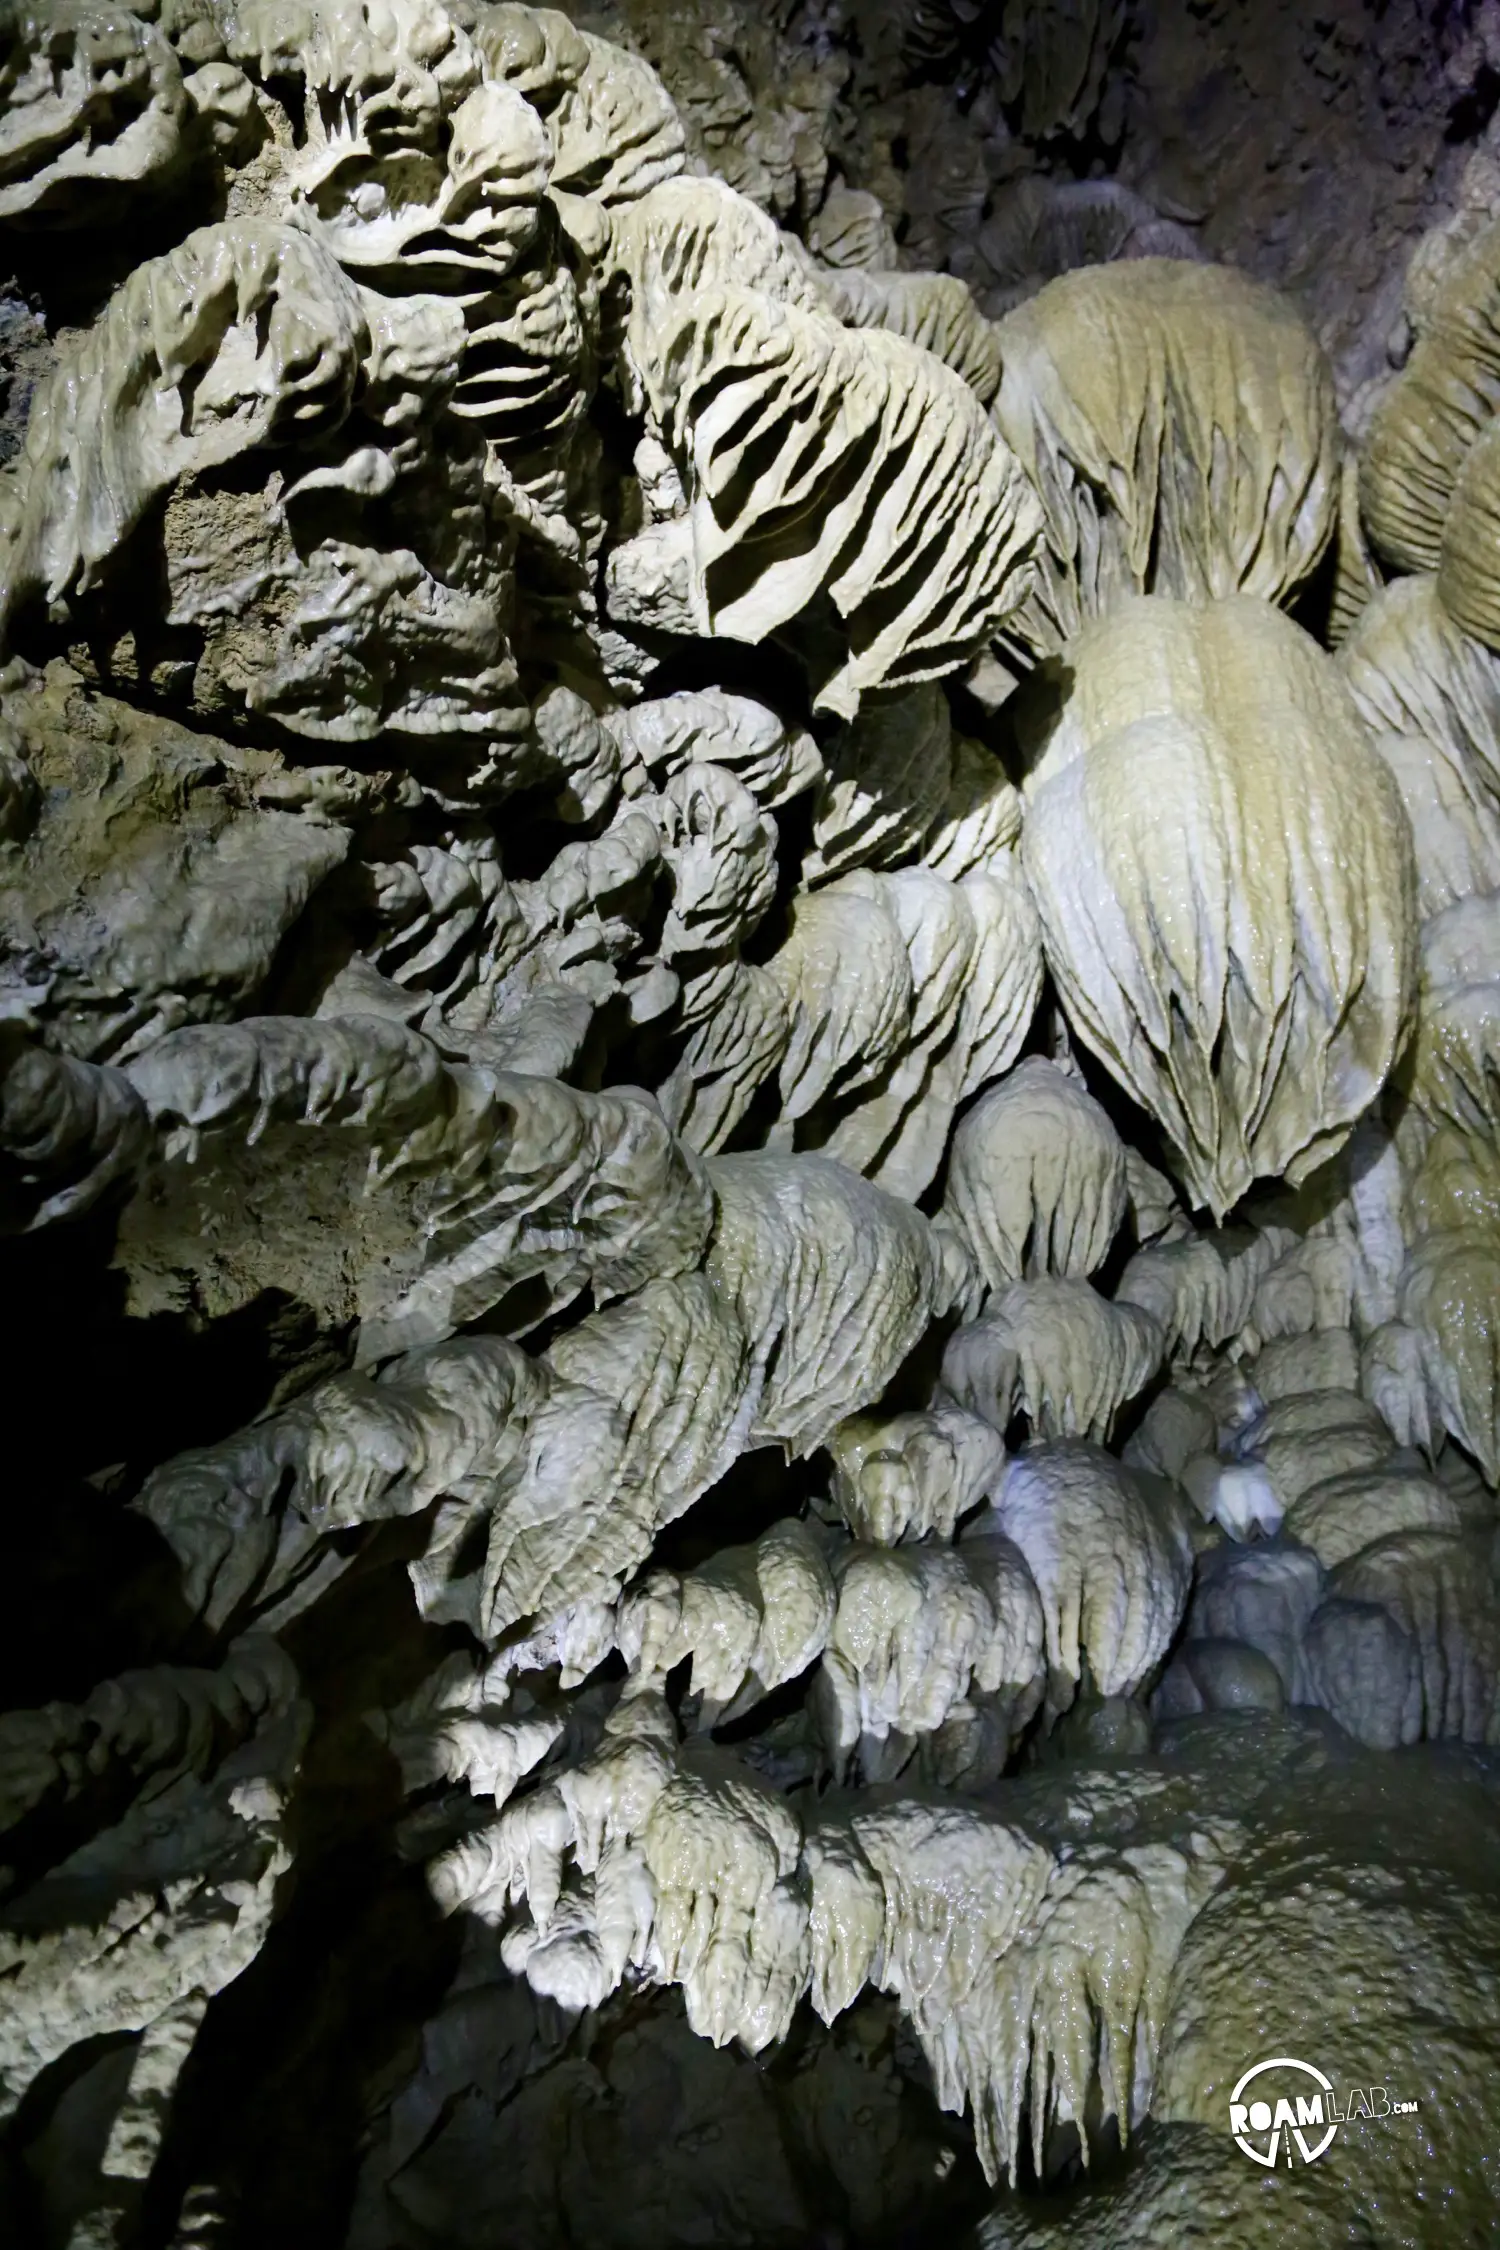 Paradise Lost is a magnificent curtain formation and, by far, the finest formation along the tour of the Oregon Caves National Monument